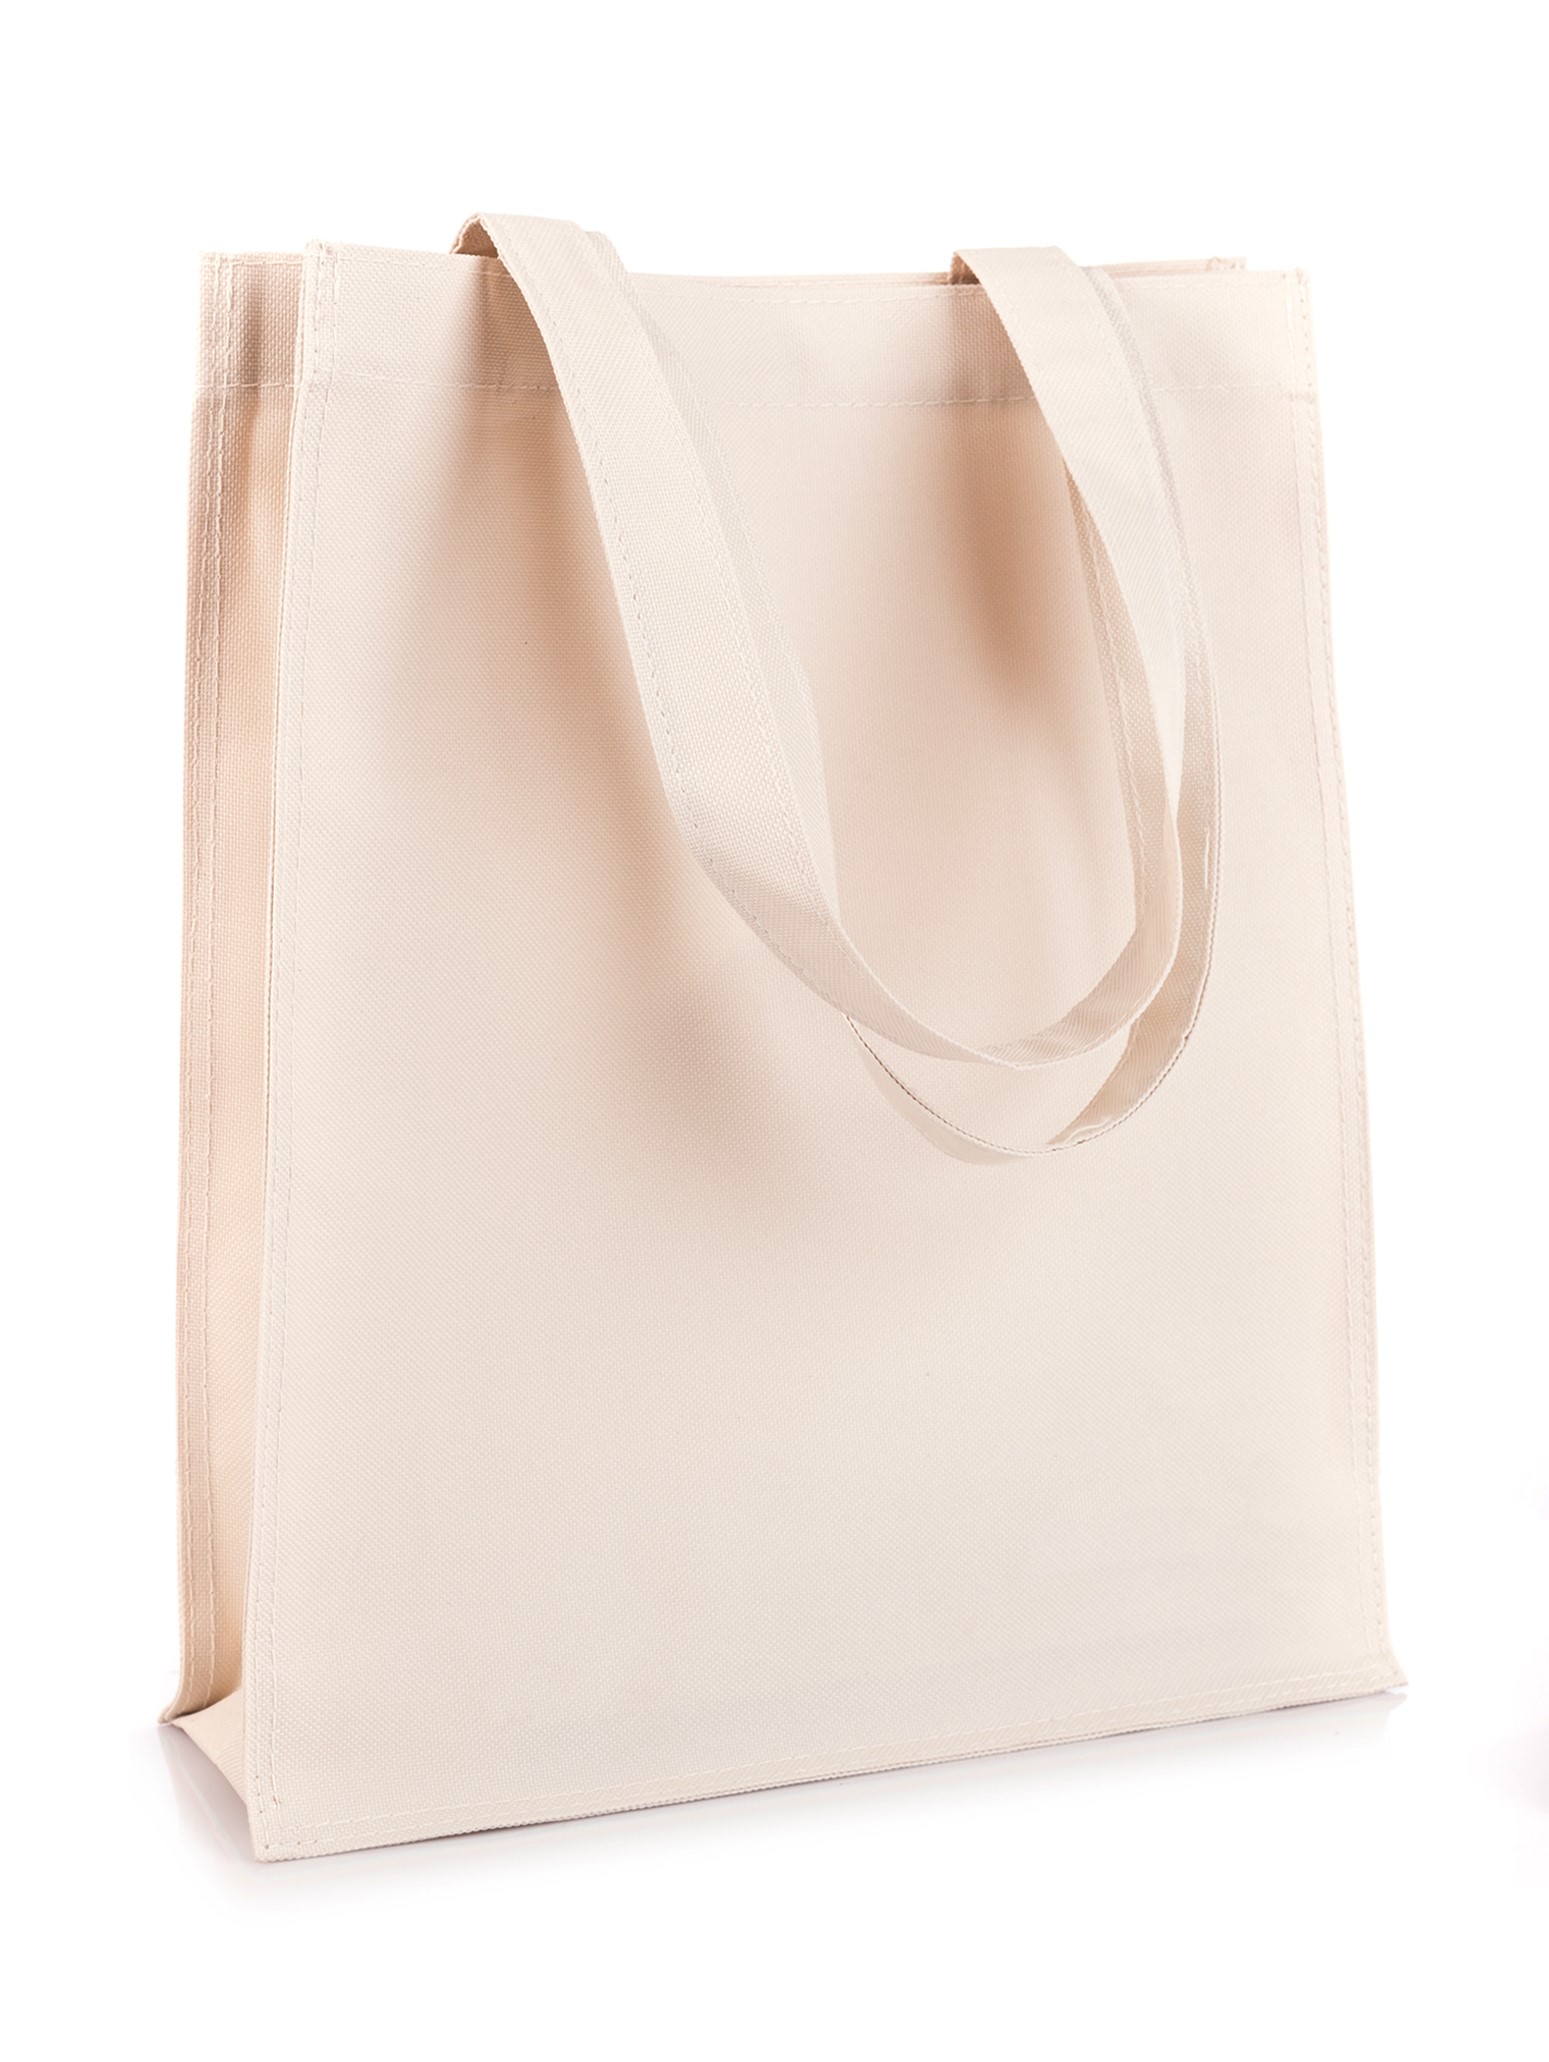 Cotton Bags manufacturers in India